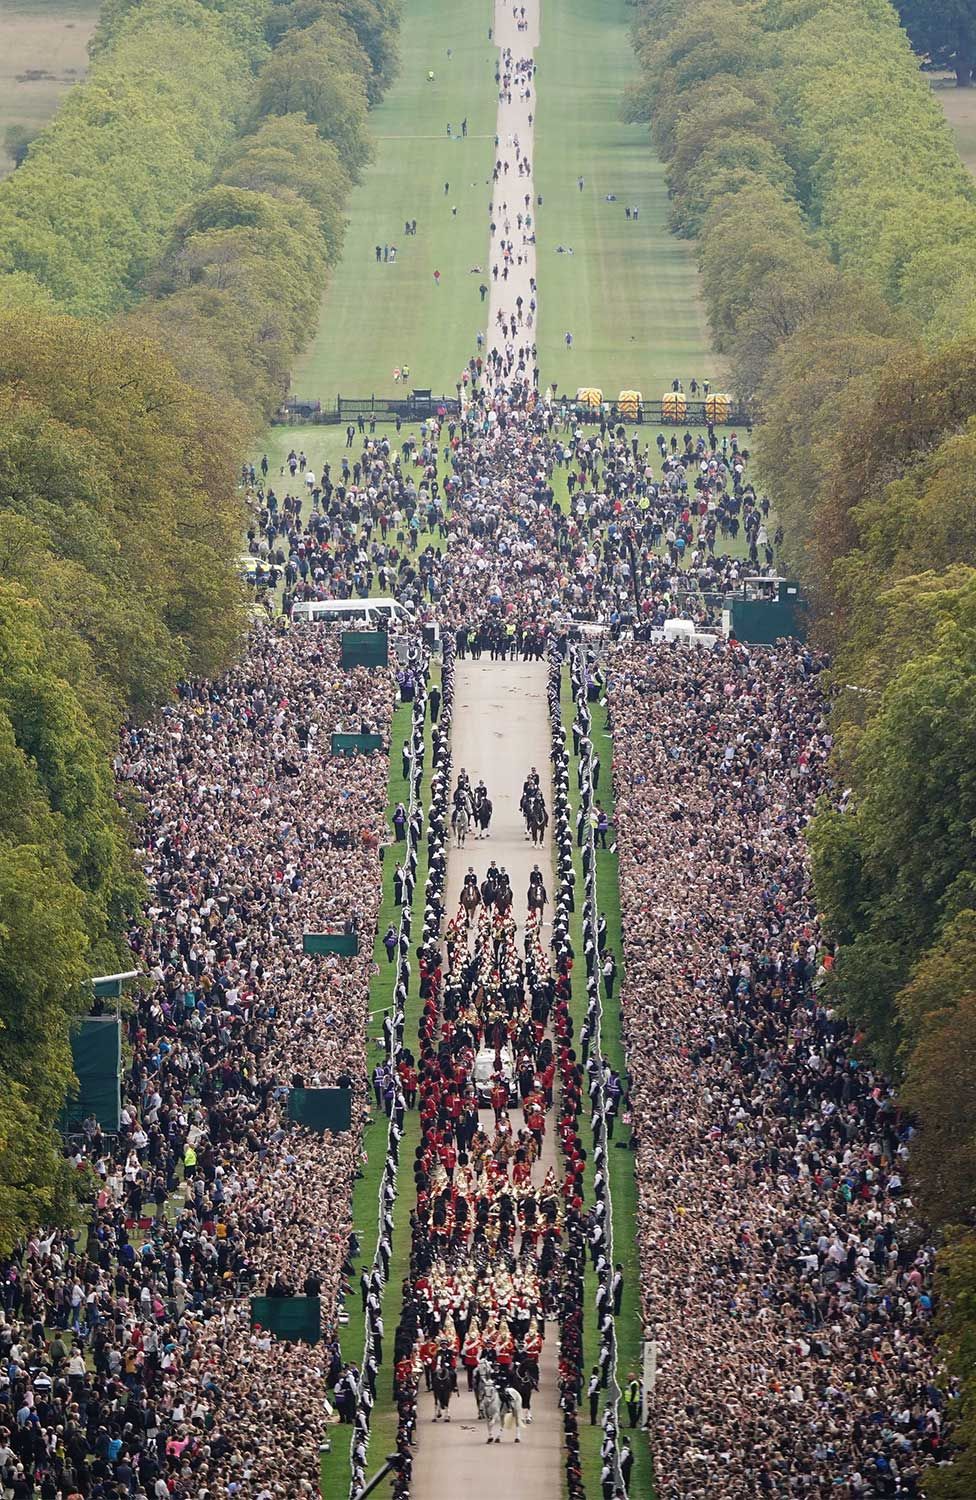 The Queen's coffin moving up the Long Walk at Windsor